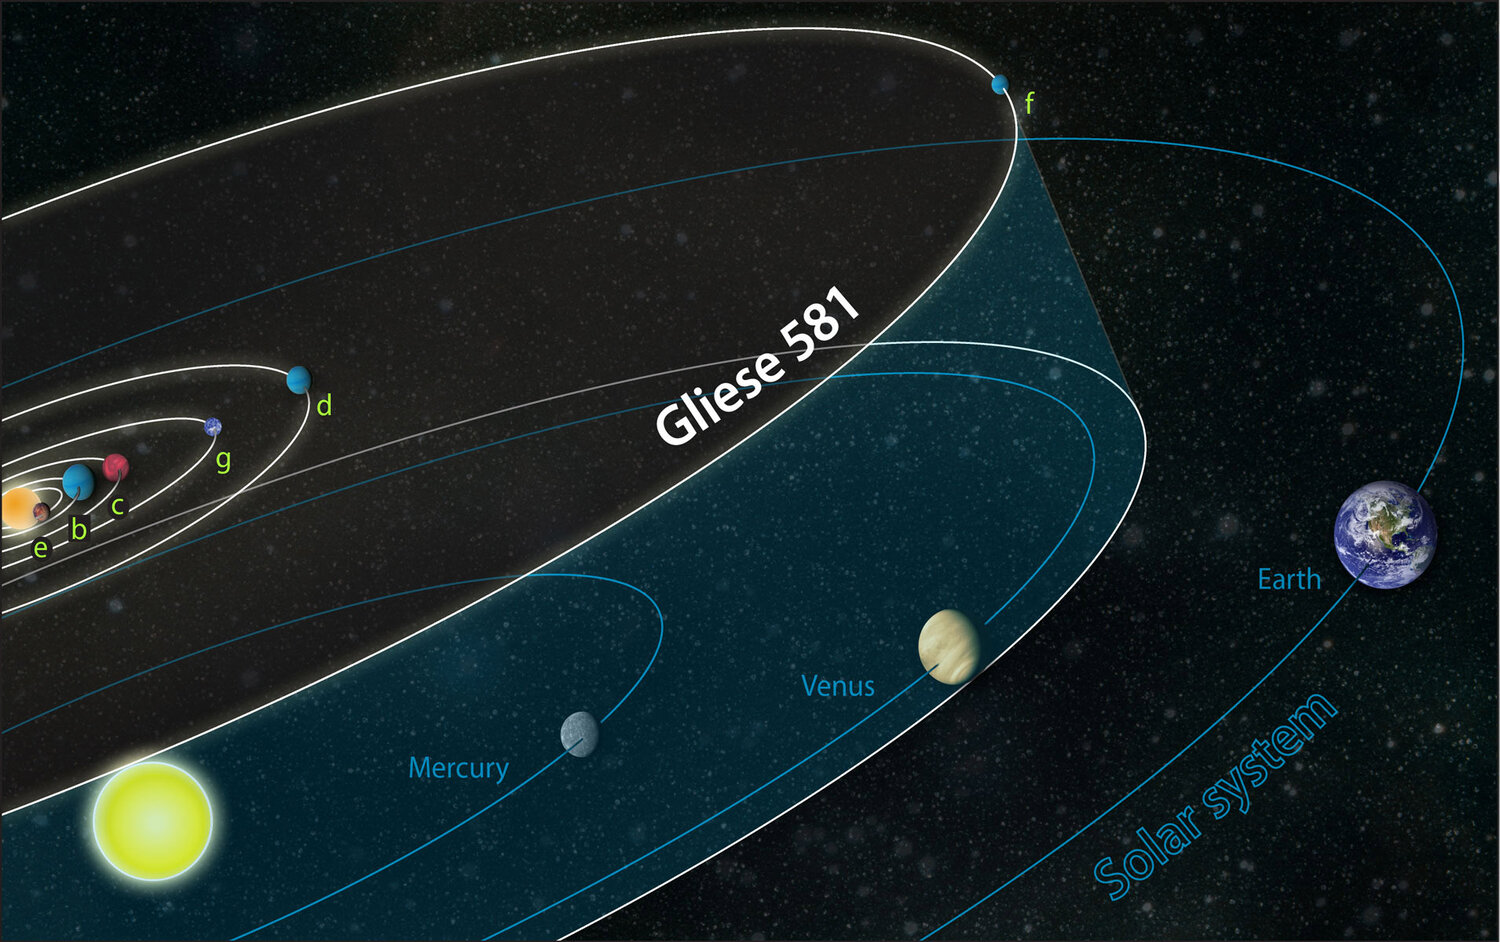 Gliese 581 system compared to solar systemZina Deretsky, National Science Foundation [Public domain]